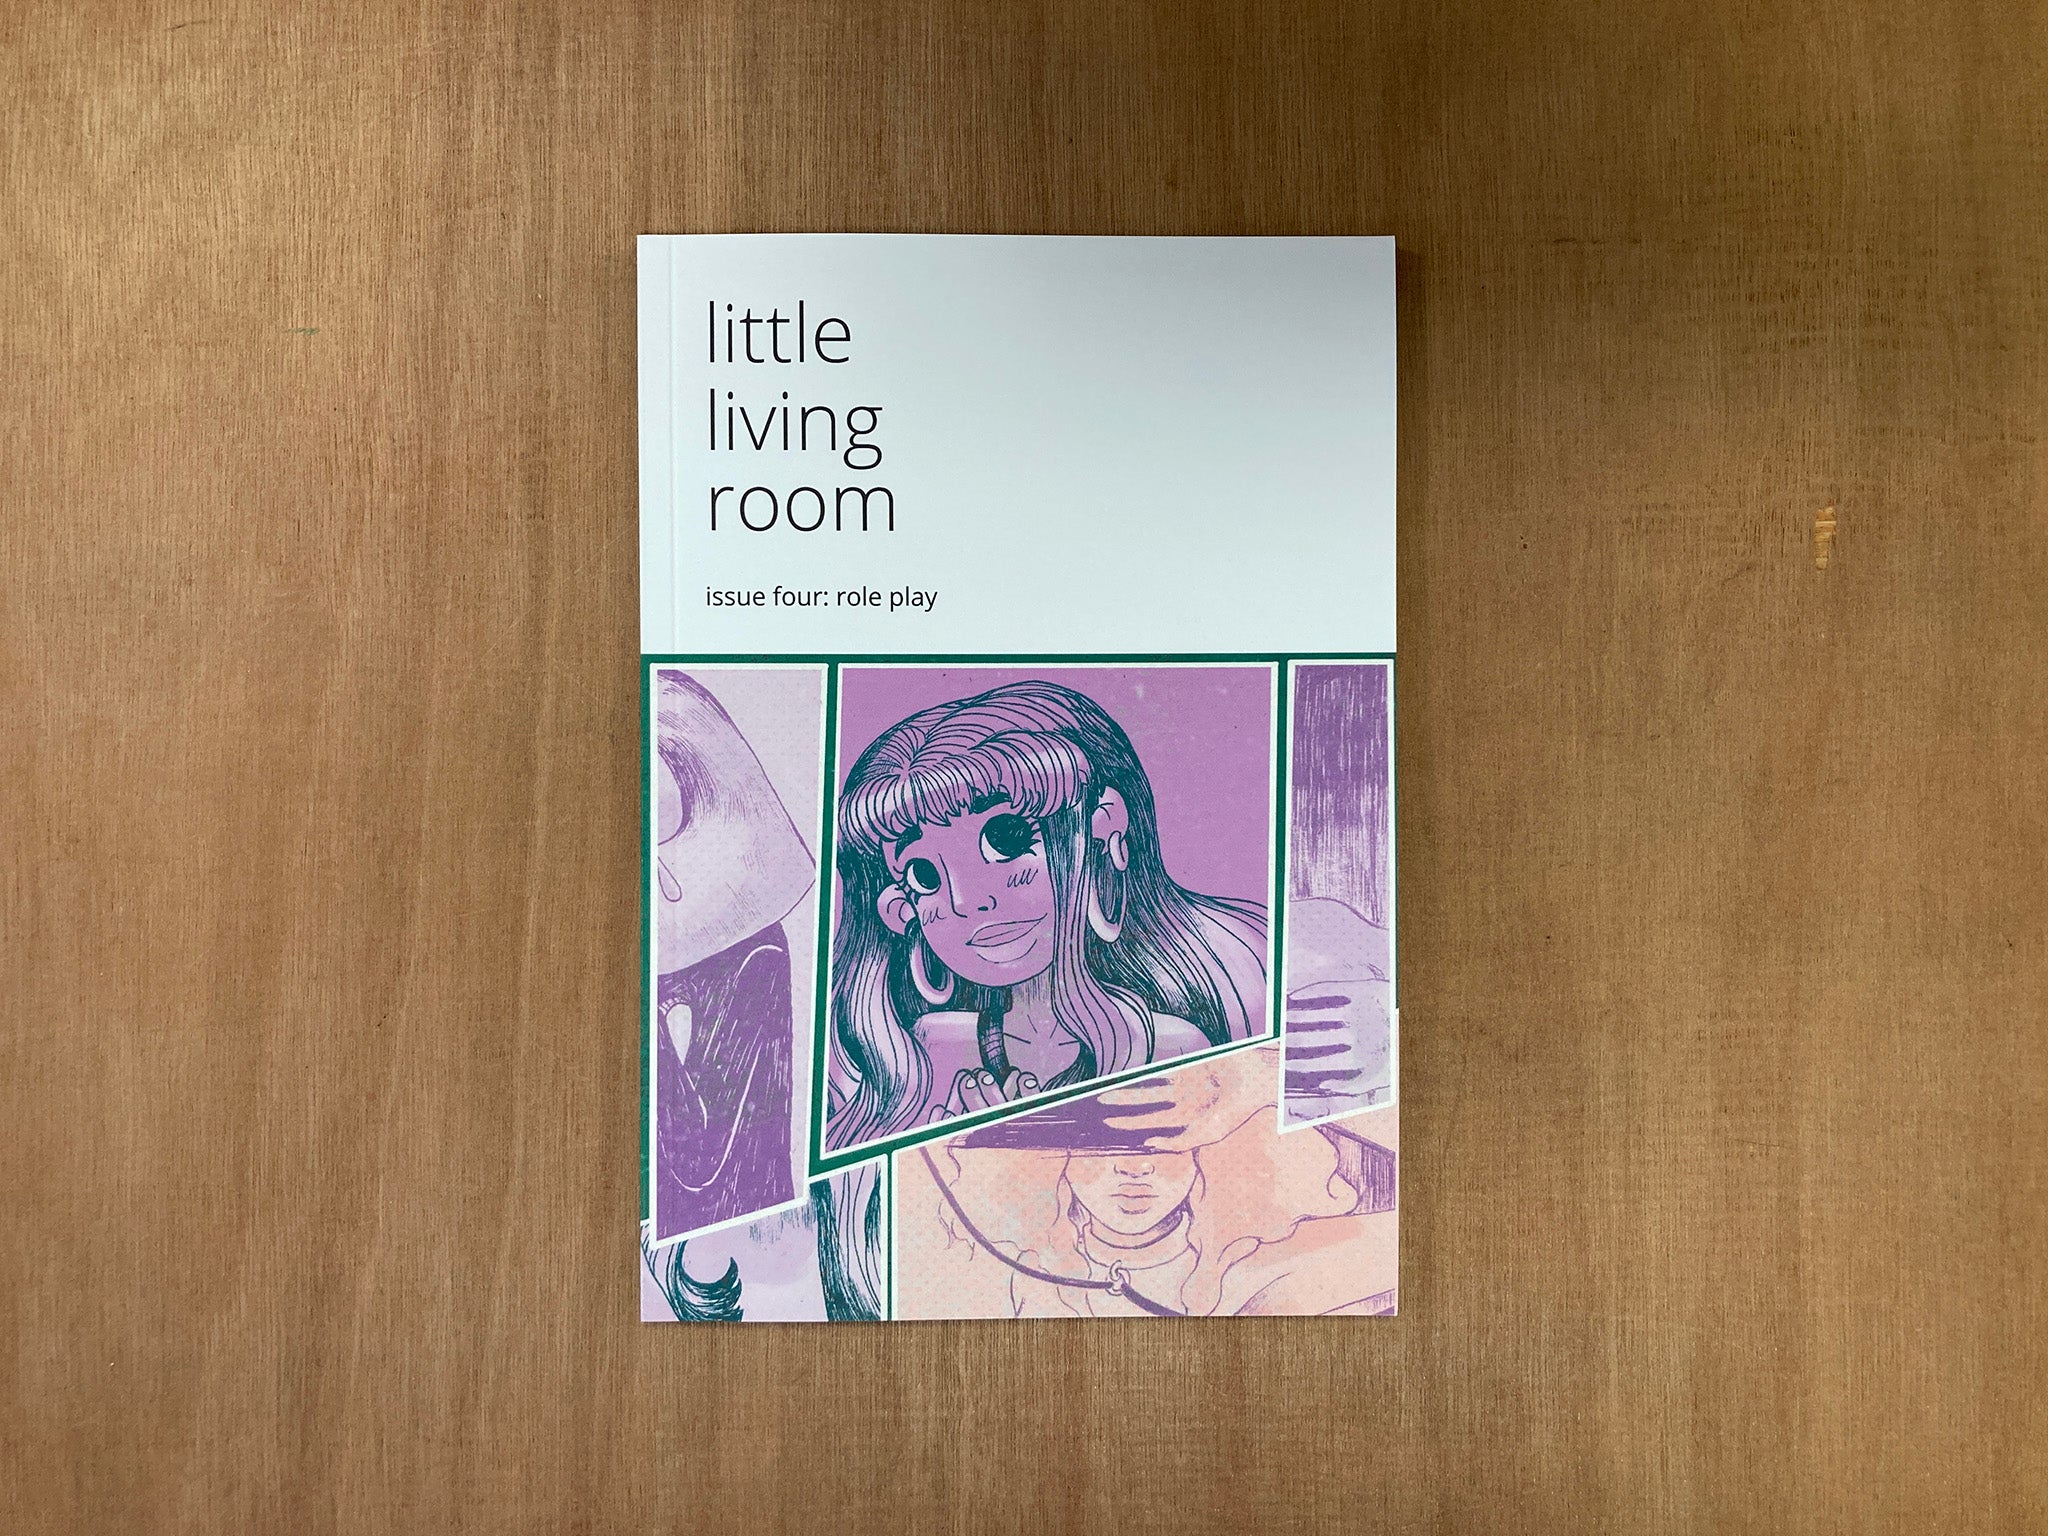 LITTLE LIVING ROOM ISSUE 4: ROLE PLAY